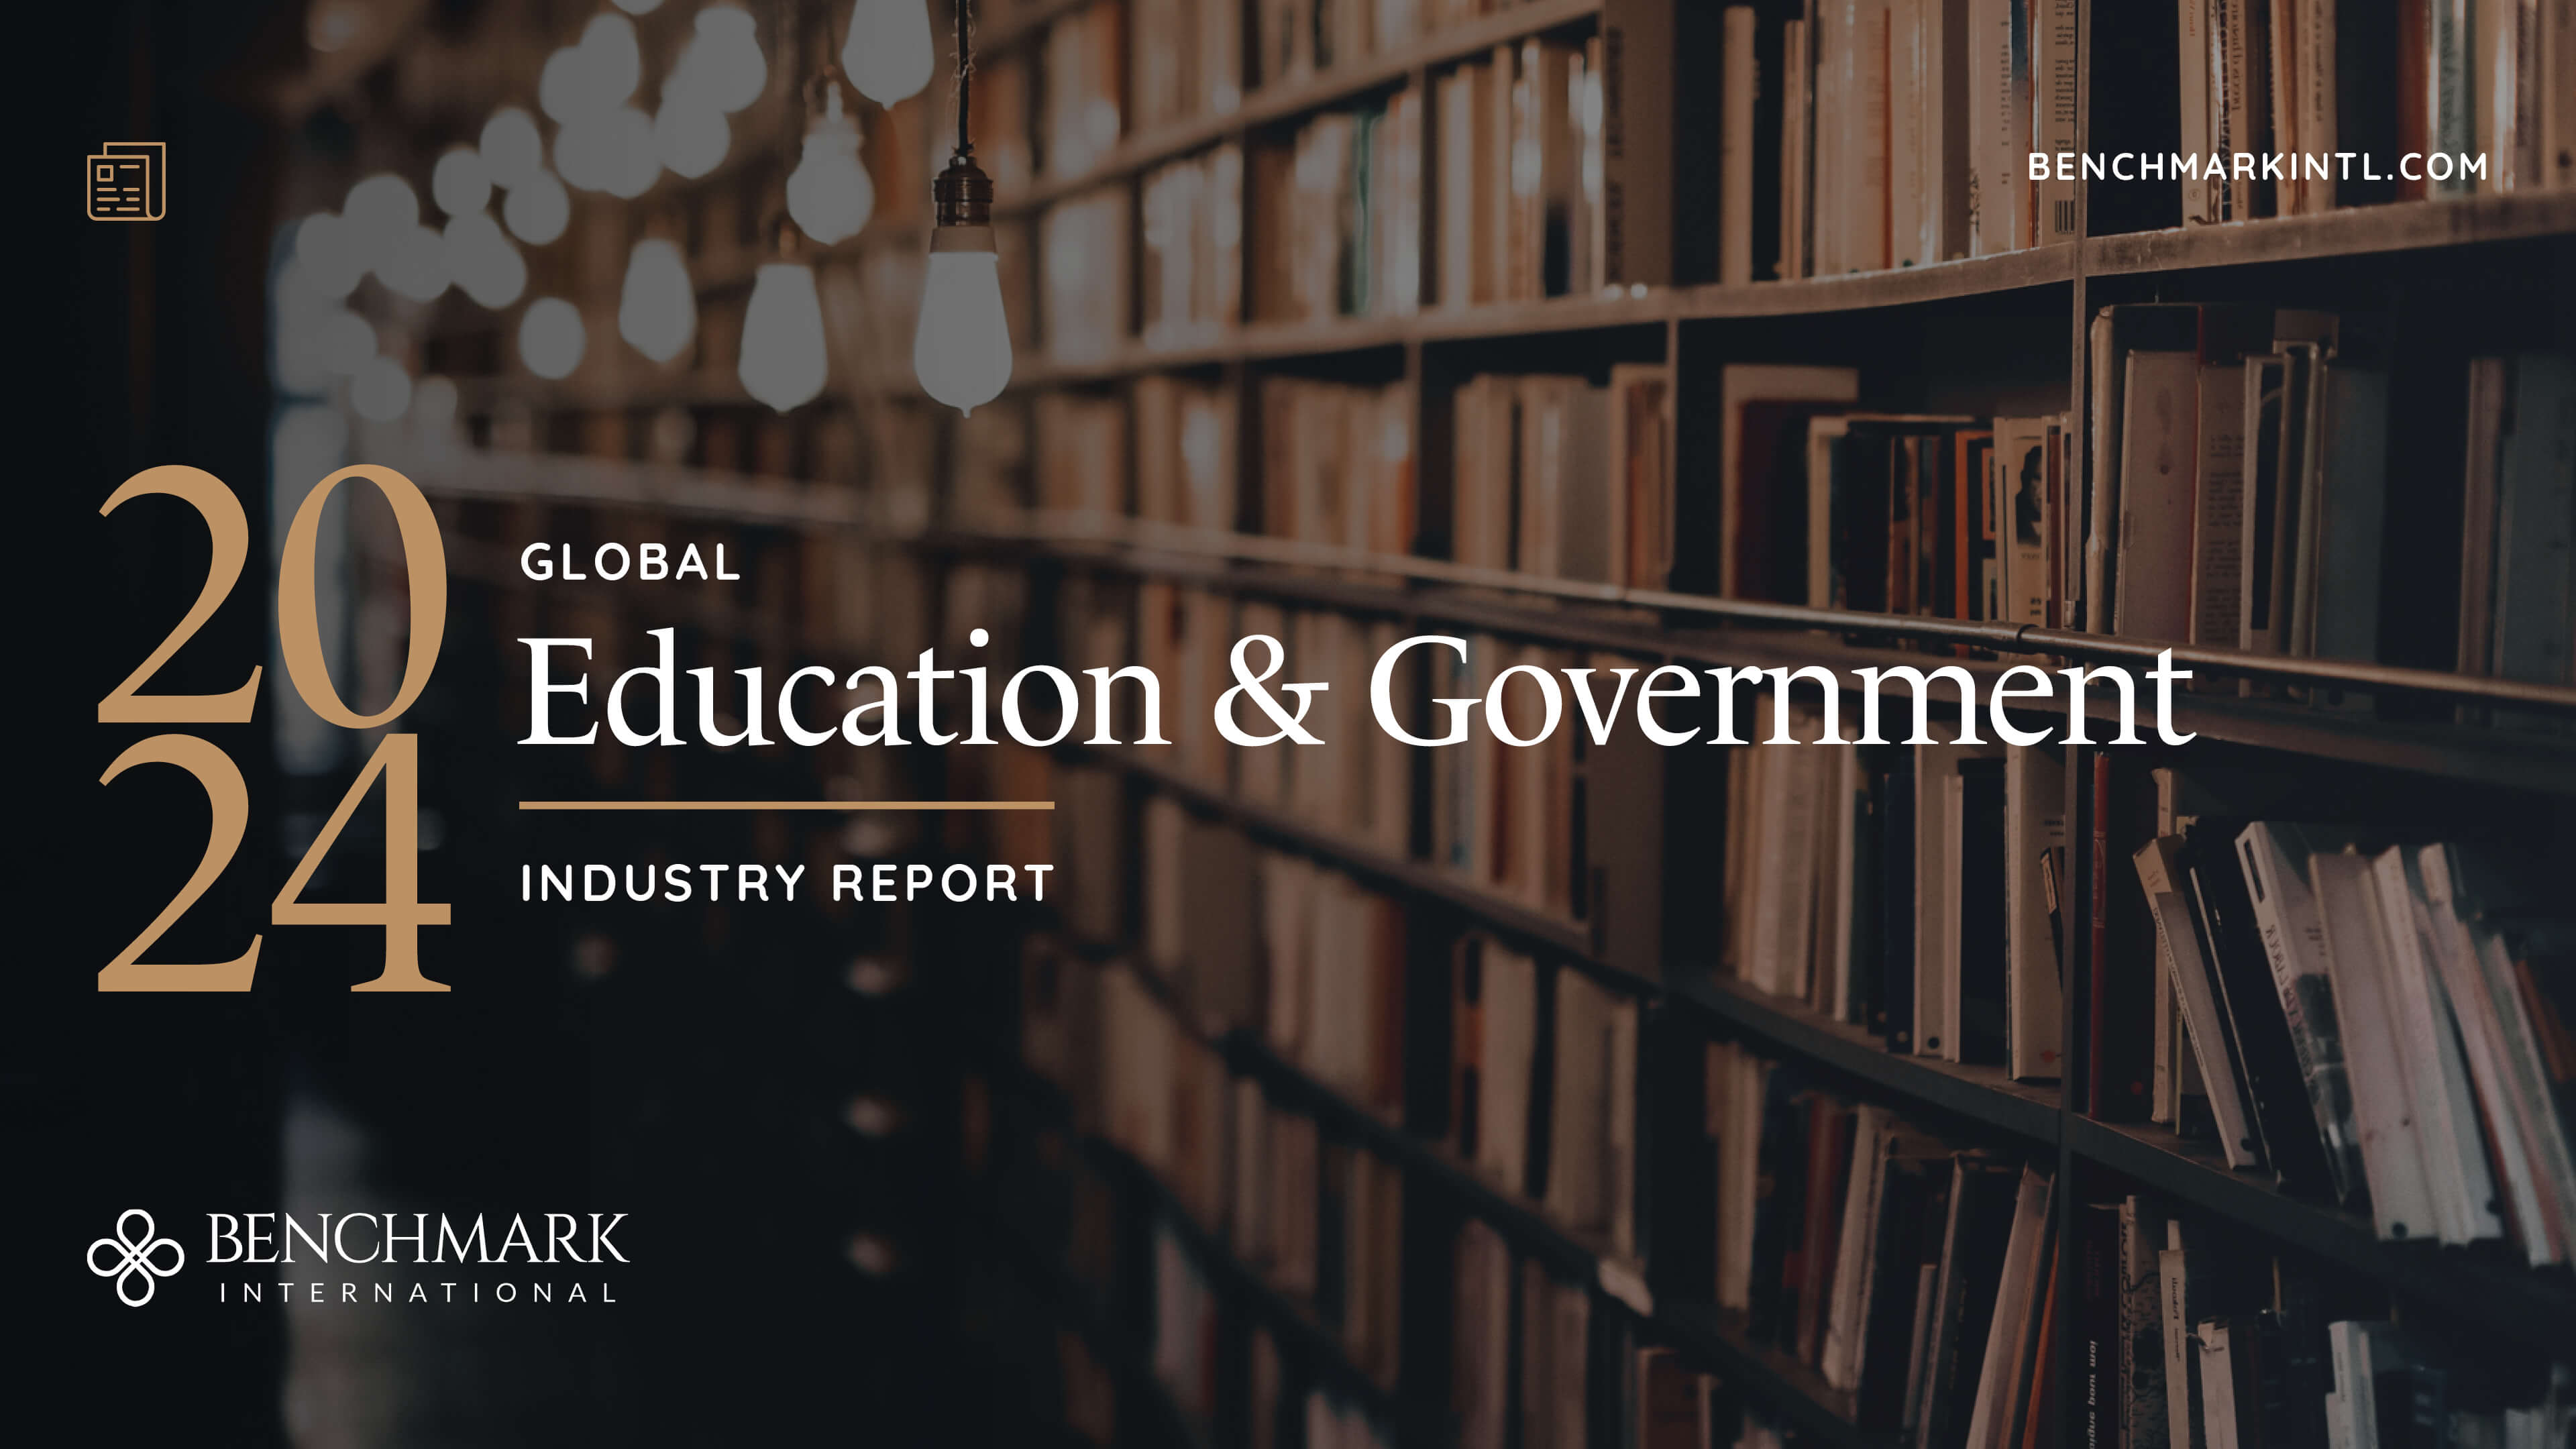 project report on education industry